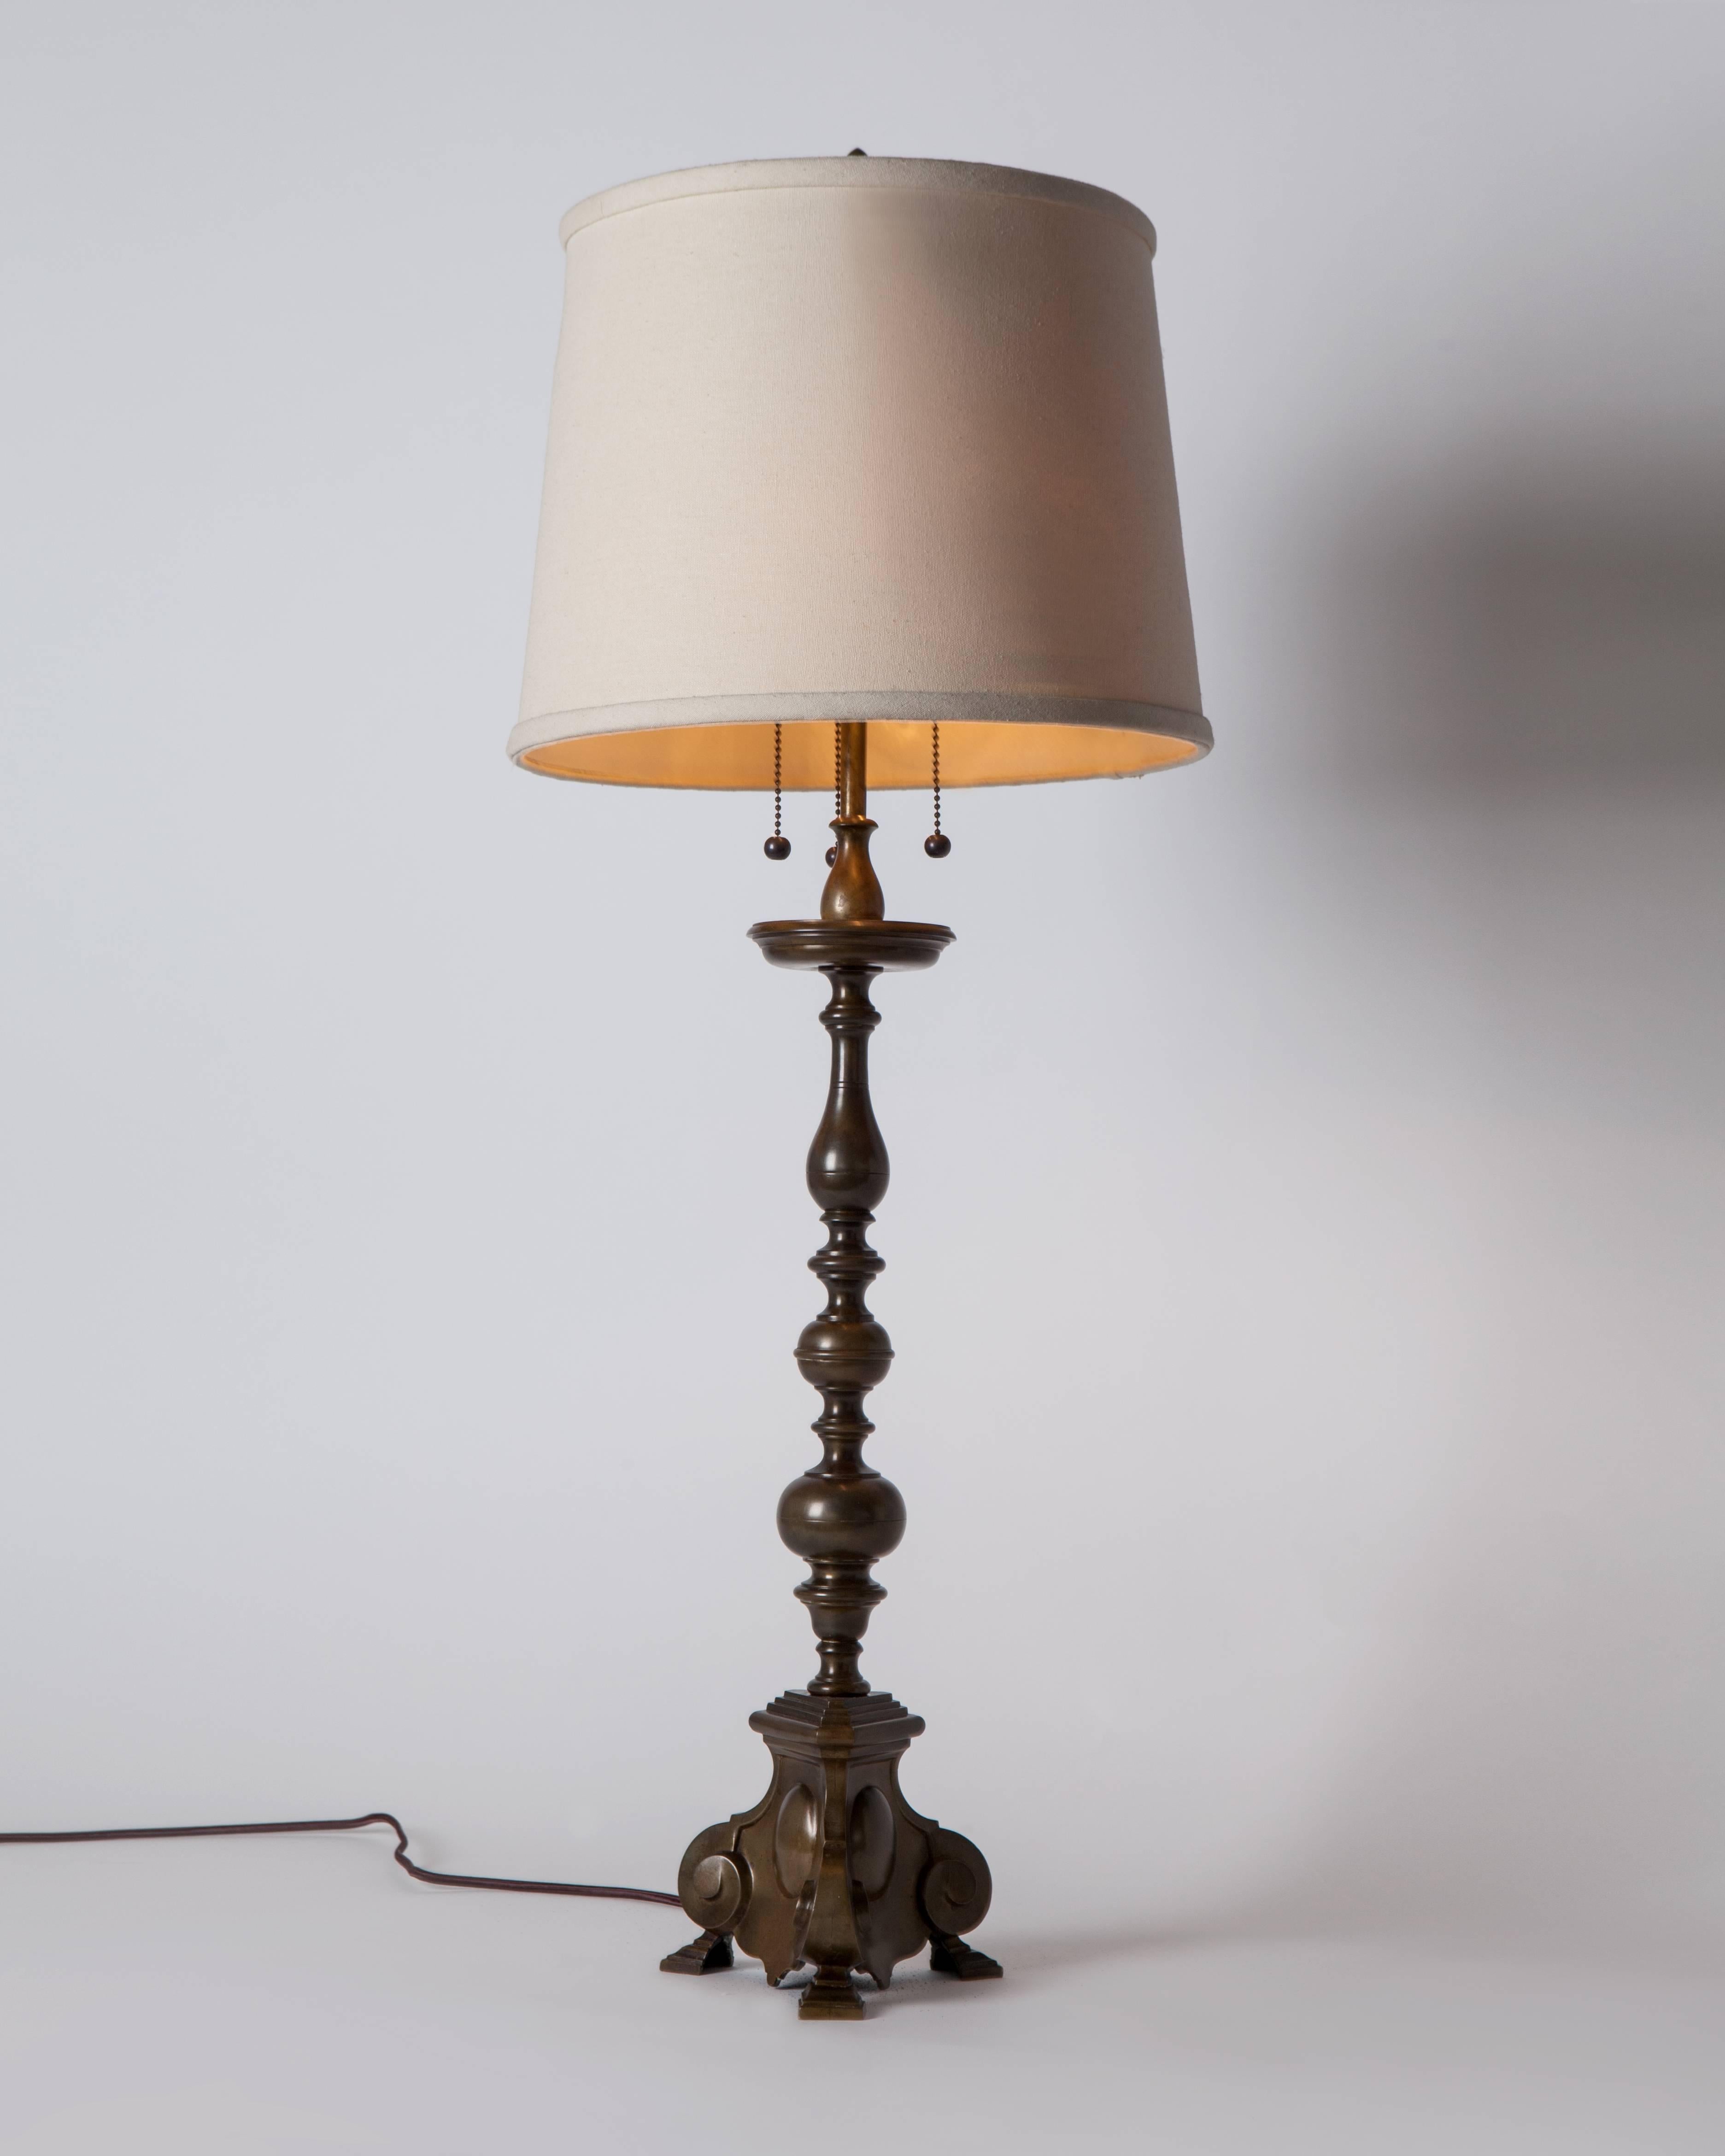 ATL1938
An antique bronze table lamp with a baluster-form standard above a baroque tripod base, in its original, wonderful, age-darkened, variegated patina. Having the original lamp bodies, socket shells, and finials. Attributed to the New York